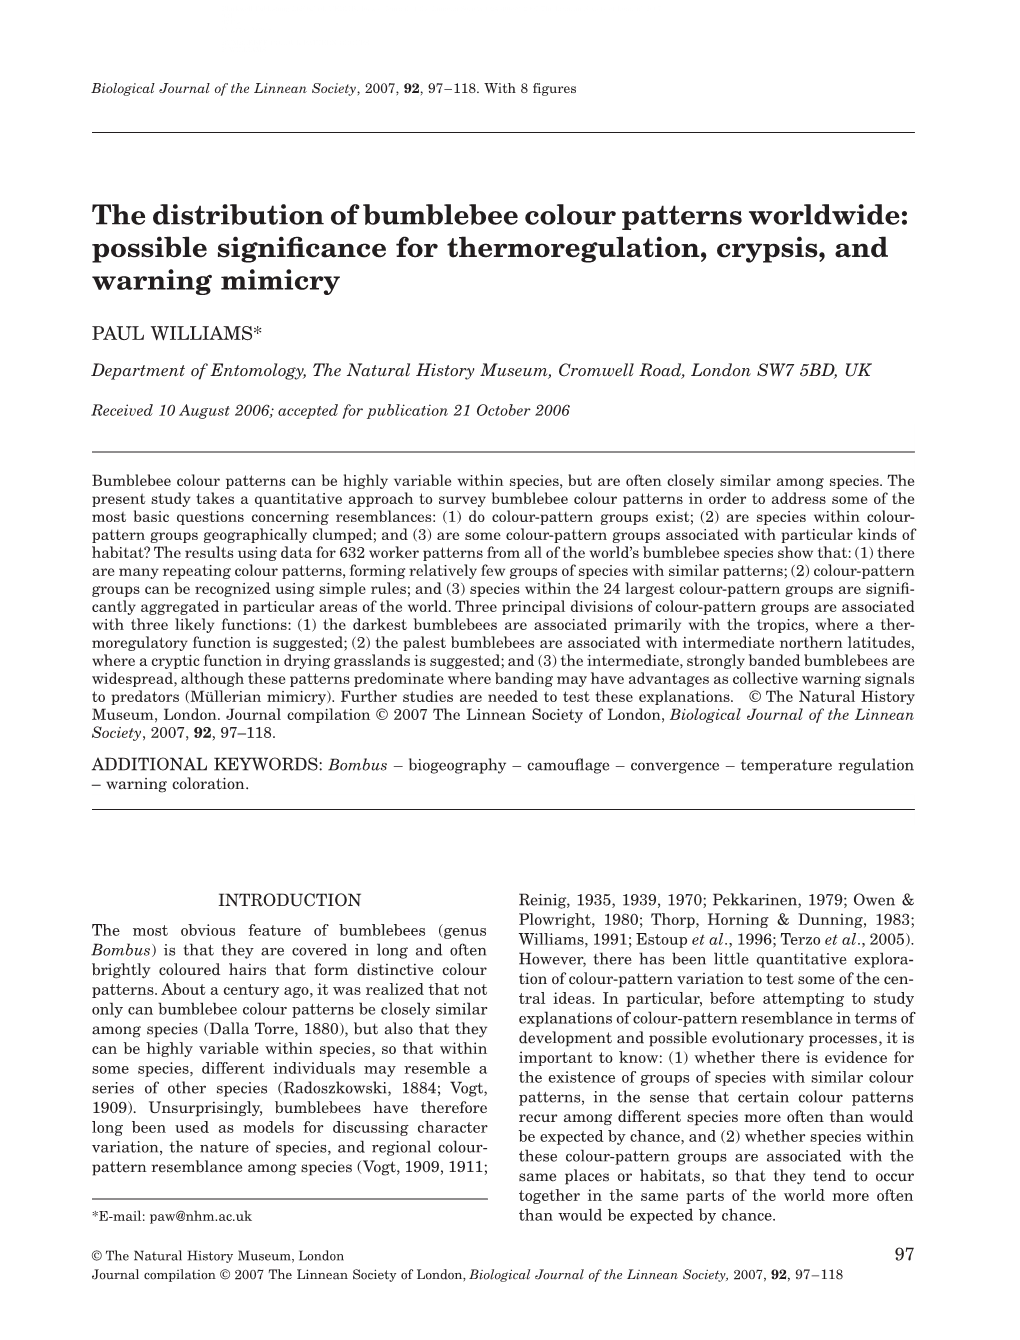 The Distribution of Bumblebee Colour Patterns Worldwide: Possible Signiﬁcance for Thermoregulation, Crypsis, and Warning Mimicry